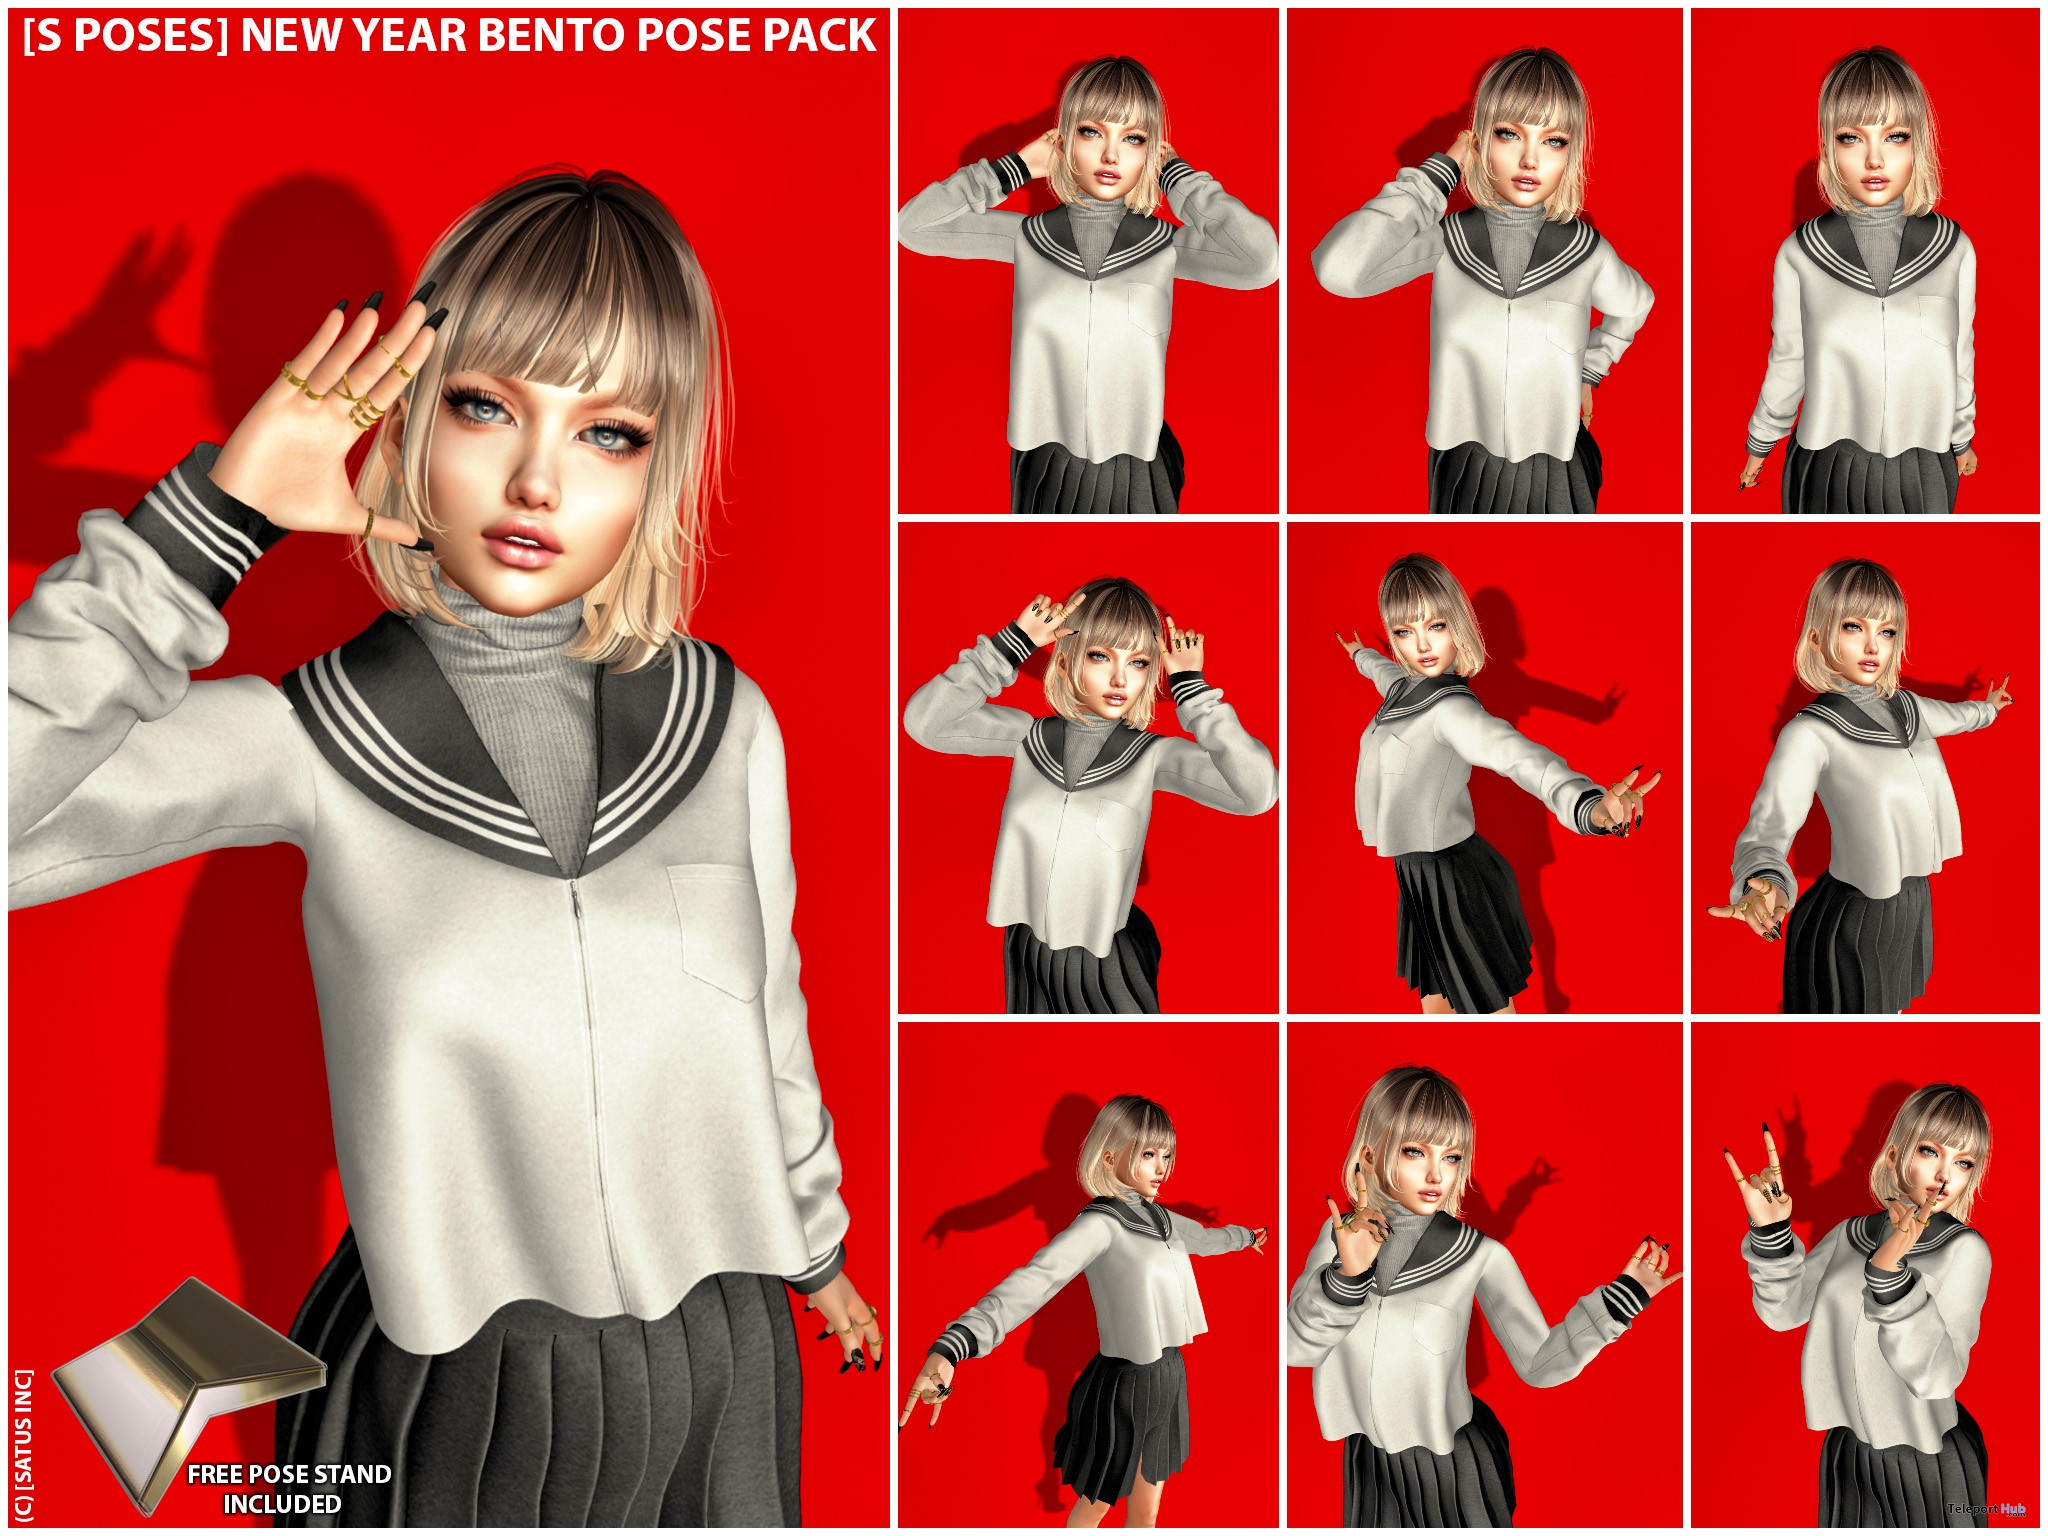 New Release: [S Poses] New Year Bento Pose Pack by [satus Inc] - Teleport Hub - teleporthub.com